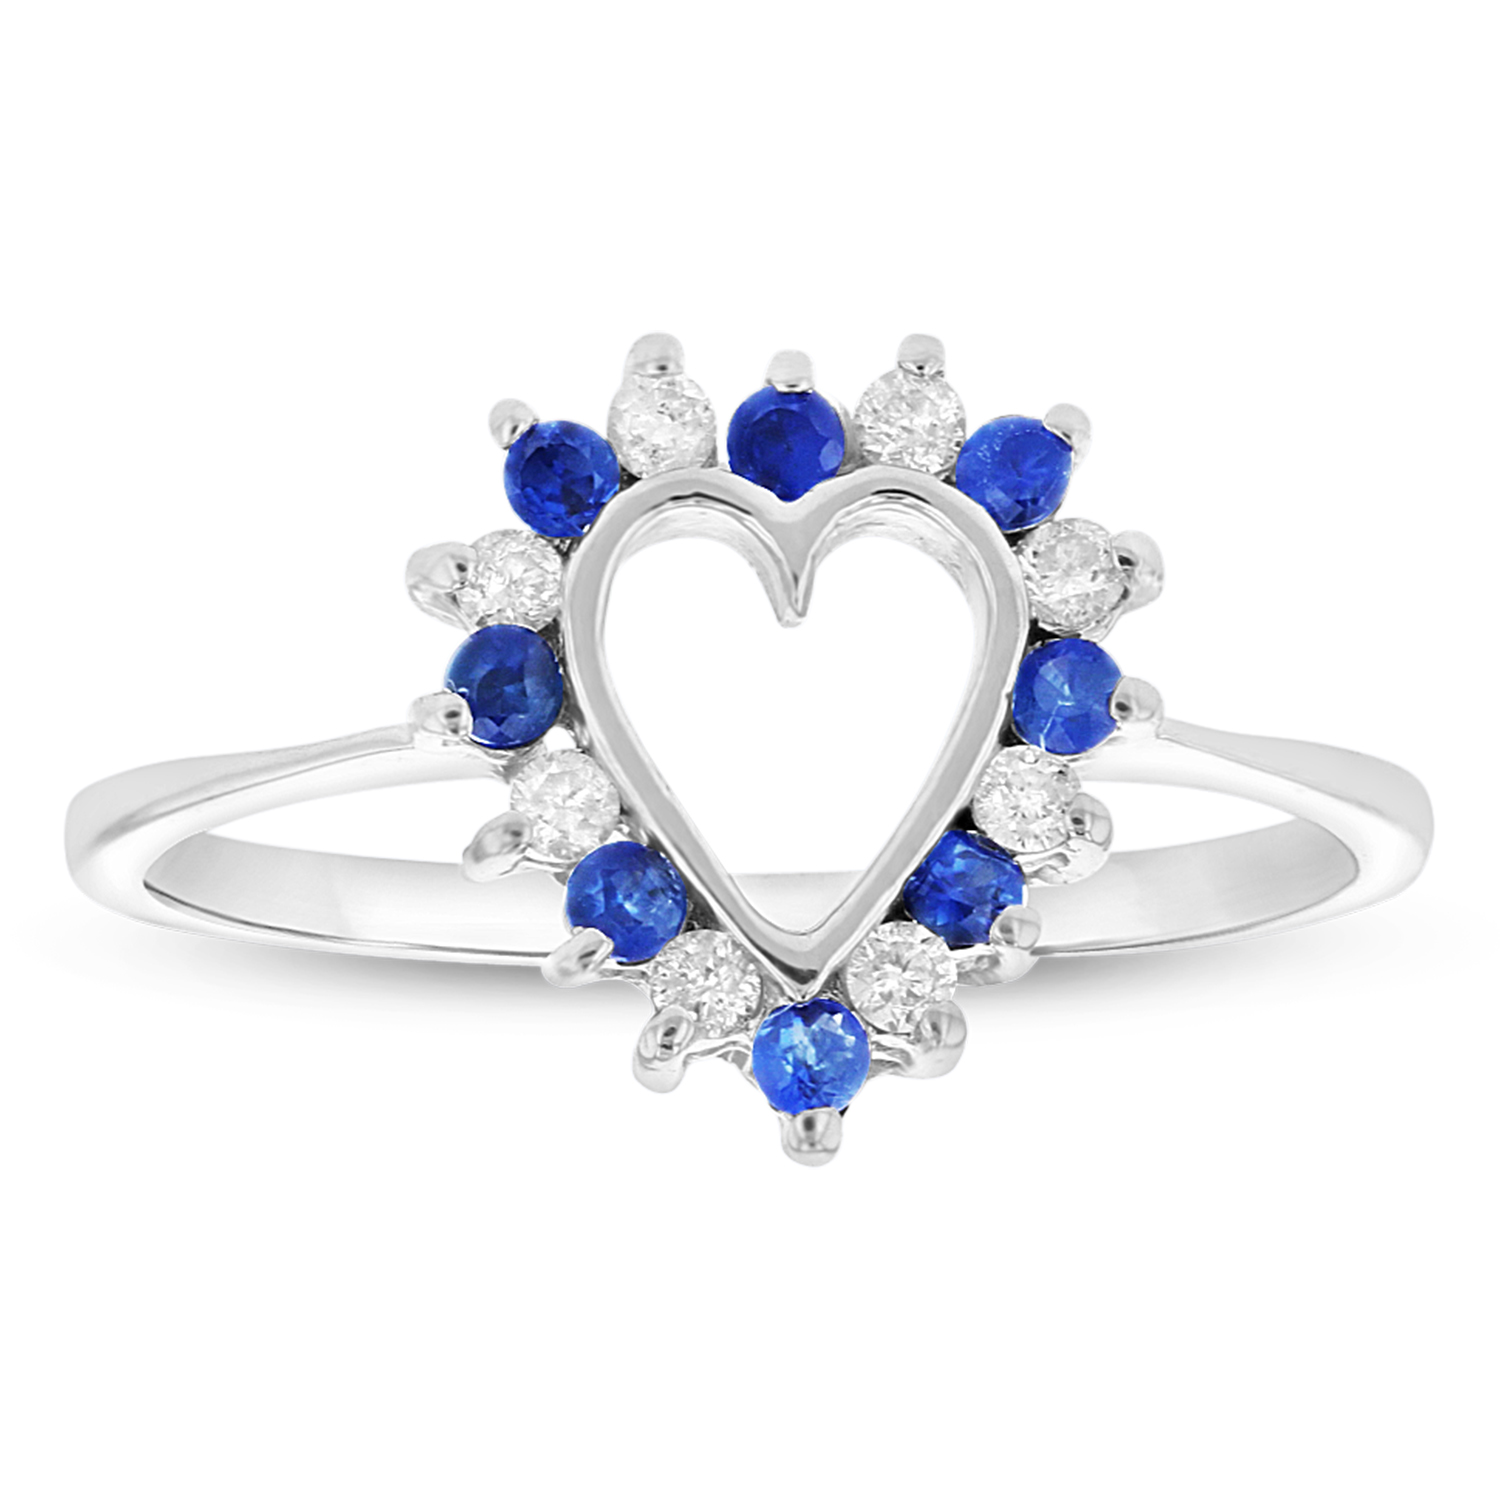 0.35ctw Diamond and Sapphire Heart Shaped Ring in 14k White Gold